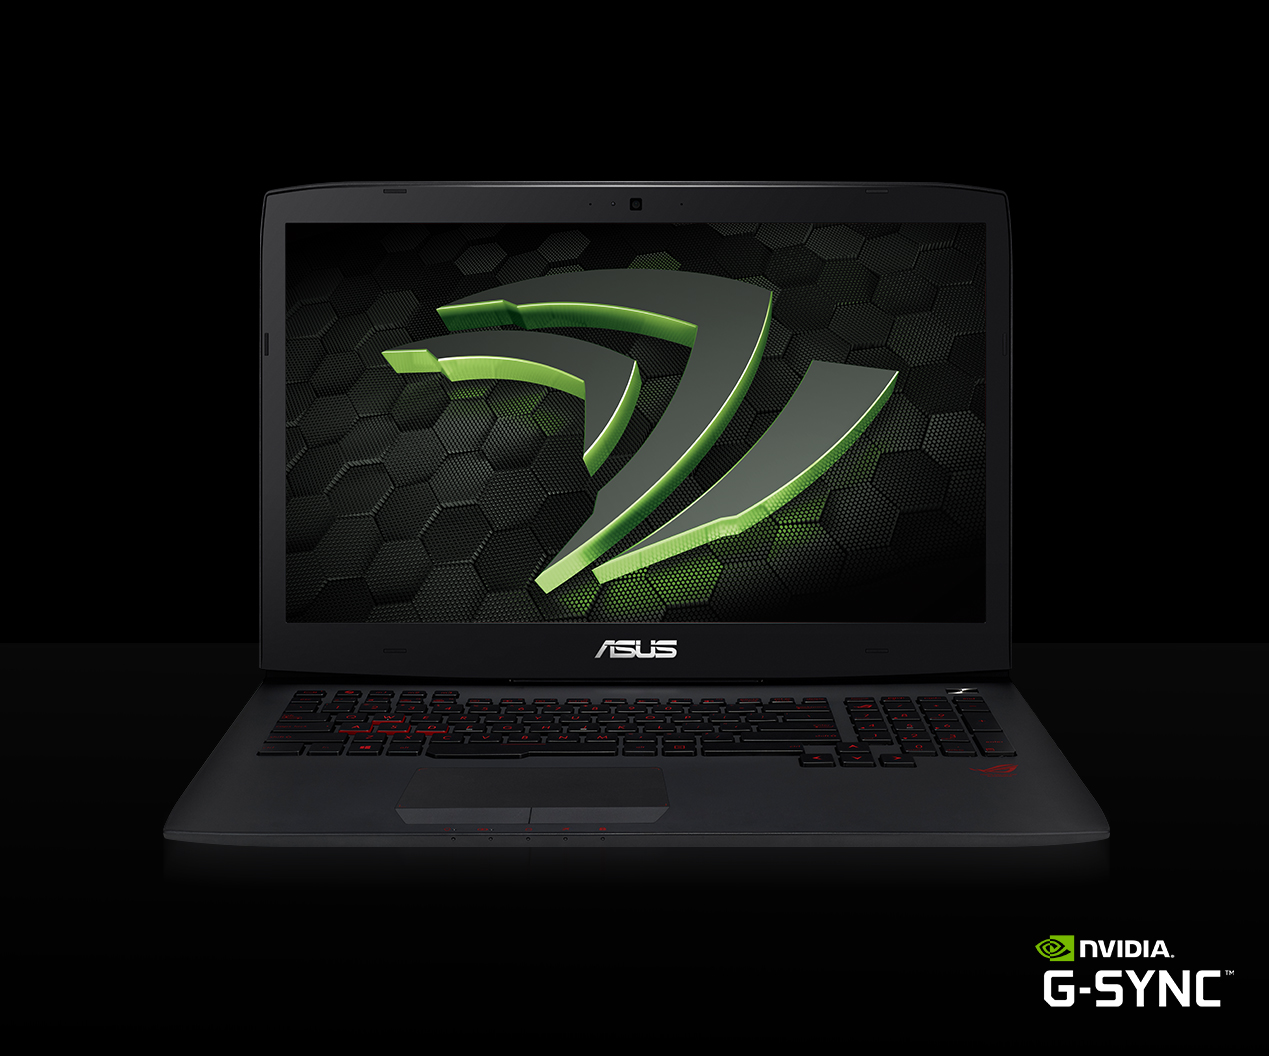 NVIDIA G-SYNC brings smoother graphics onto gaming laptops